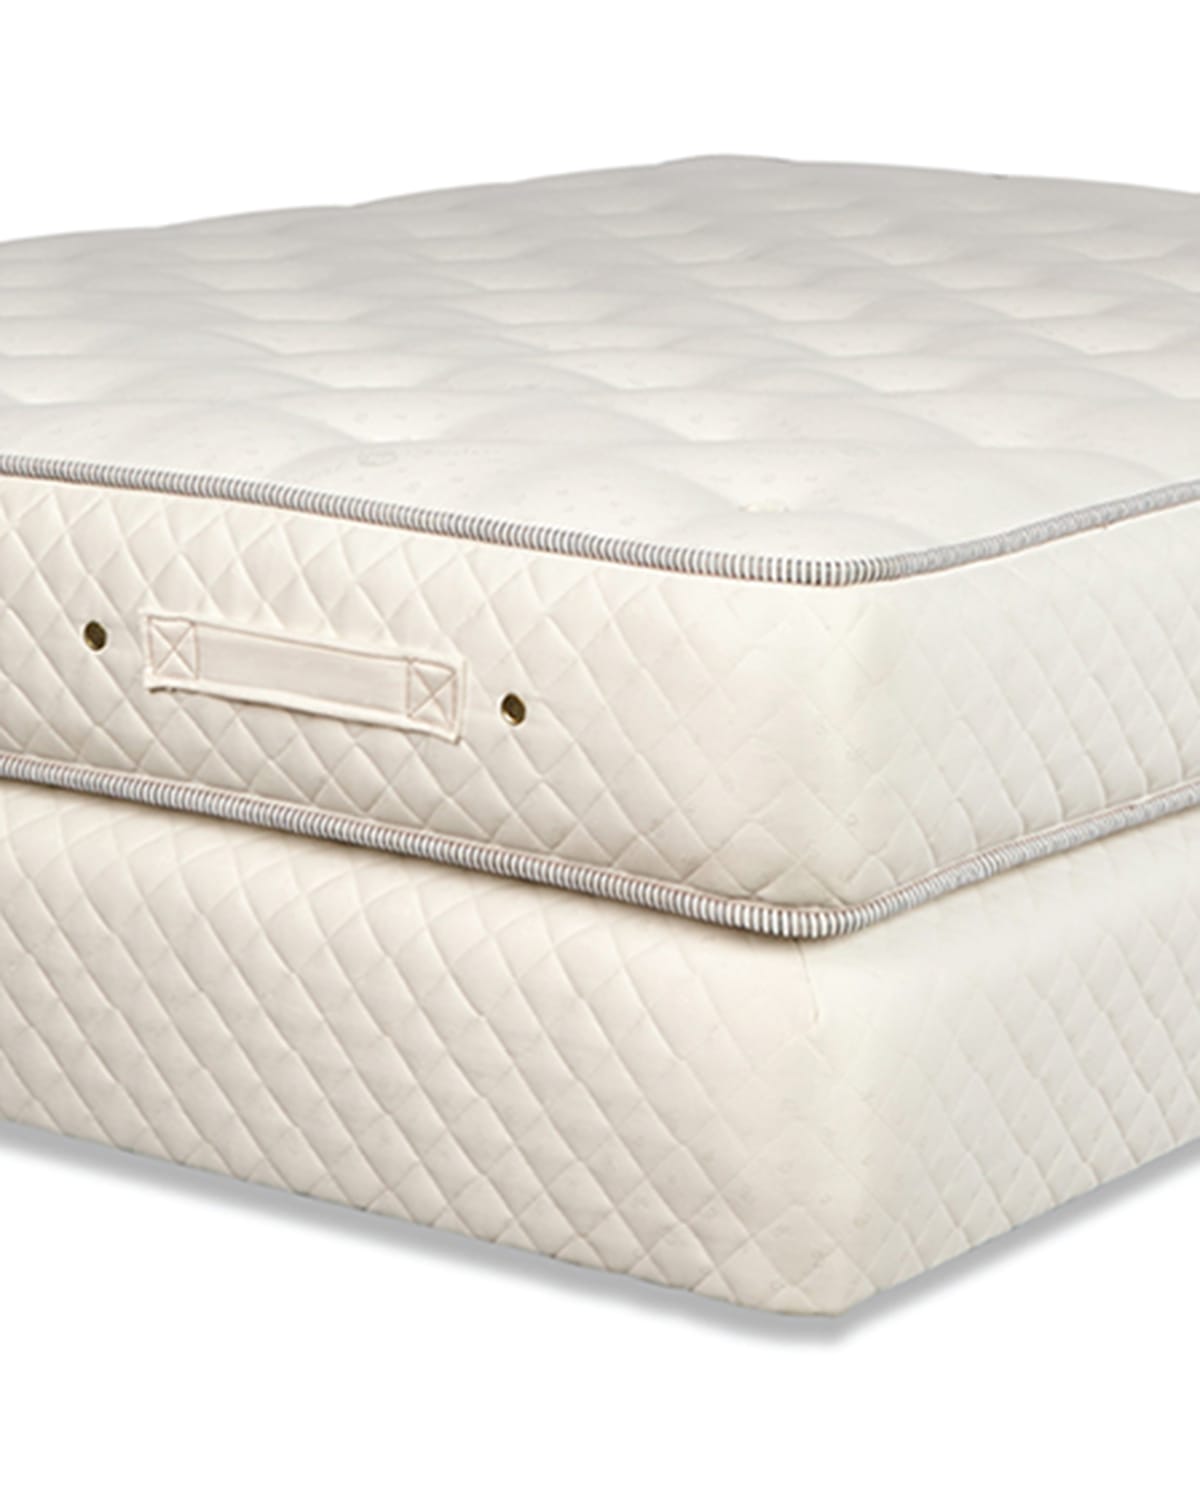 Royal-pedic Dream Spring Limited Firm Queen Mattress Set In White